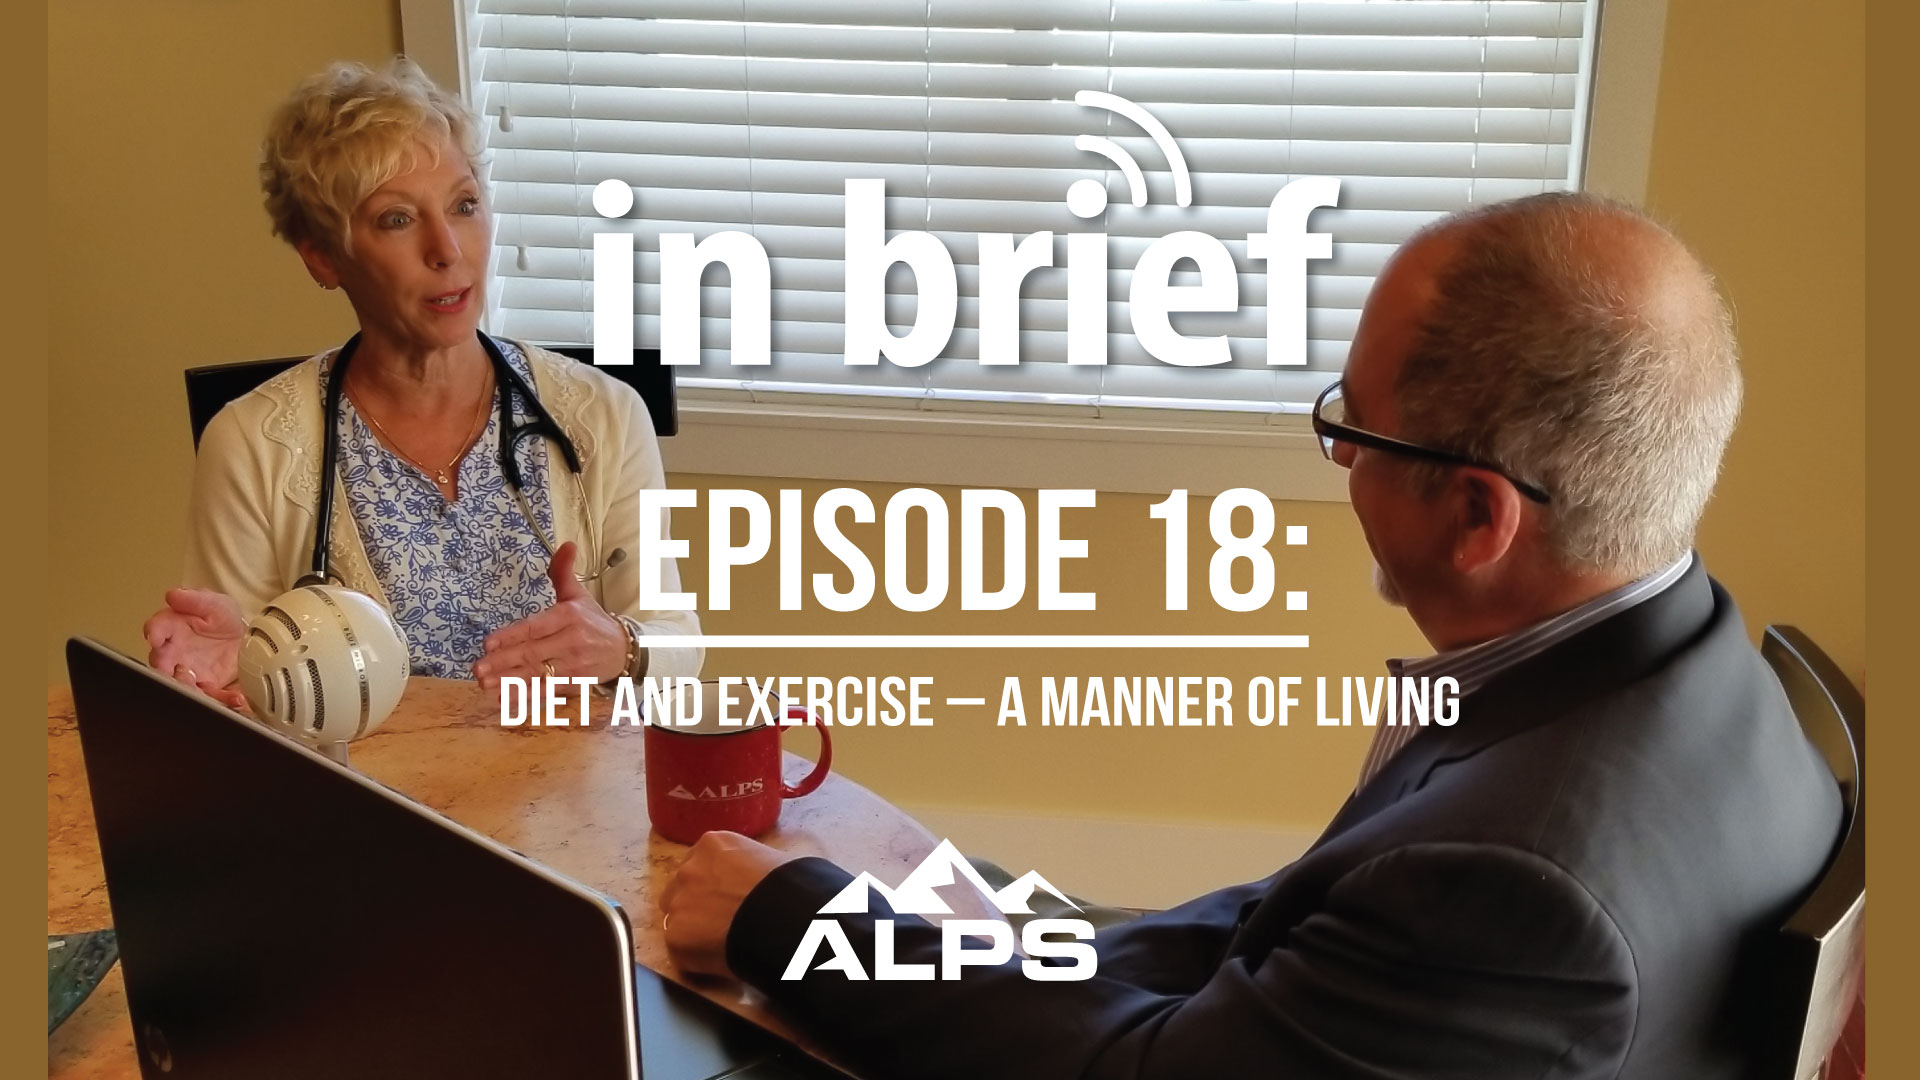 ALPS In Brief Podcast - Episode 18: Diet and Exercise – A Manner of Living